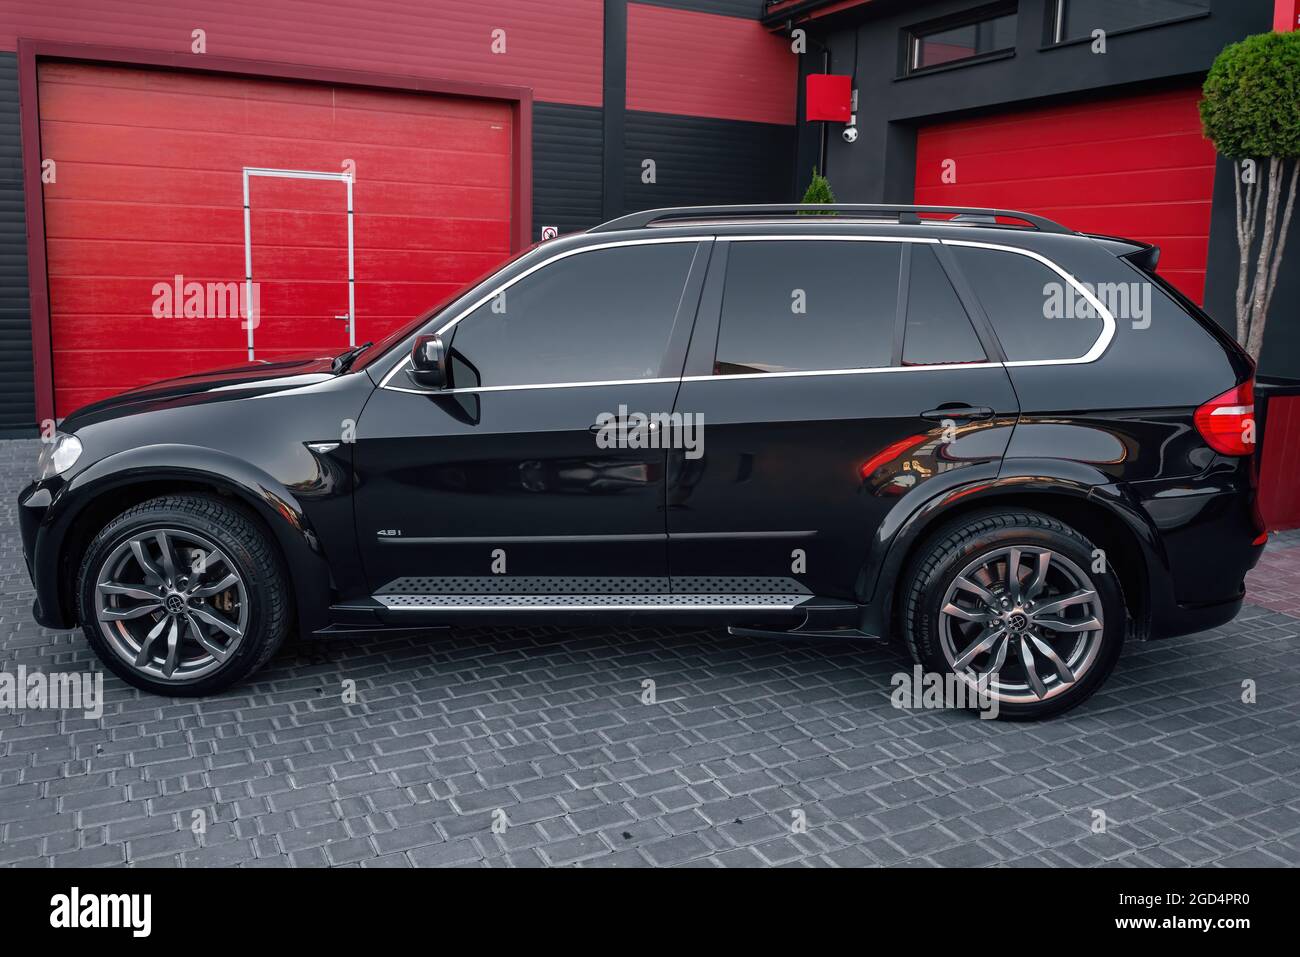 Ukraine, Odessa July 8 - 2021: Black Compact Crossover Bmw X5 On The Empty  Parking, Side View Stock Photo - Alamy